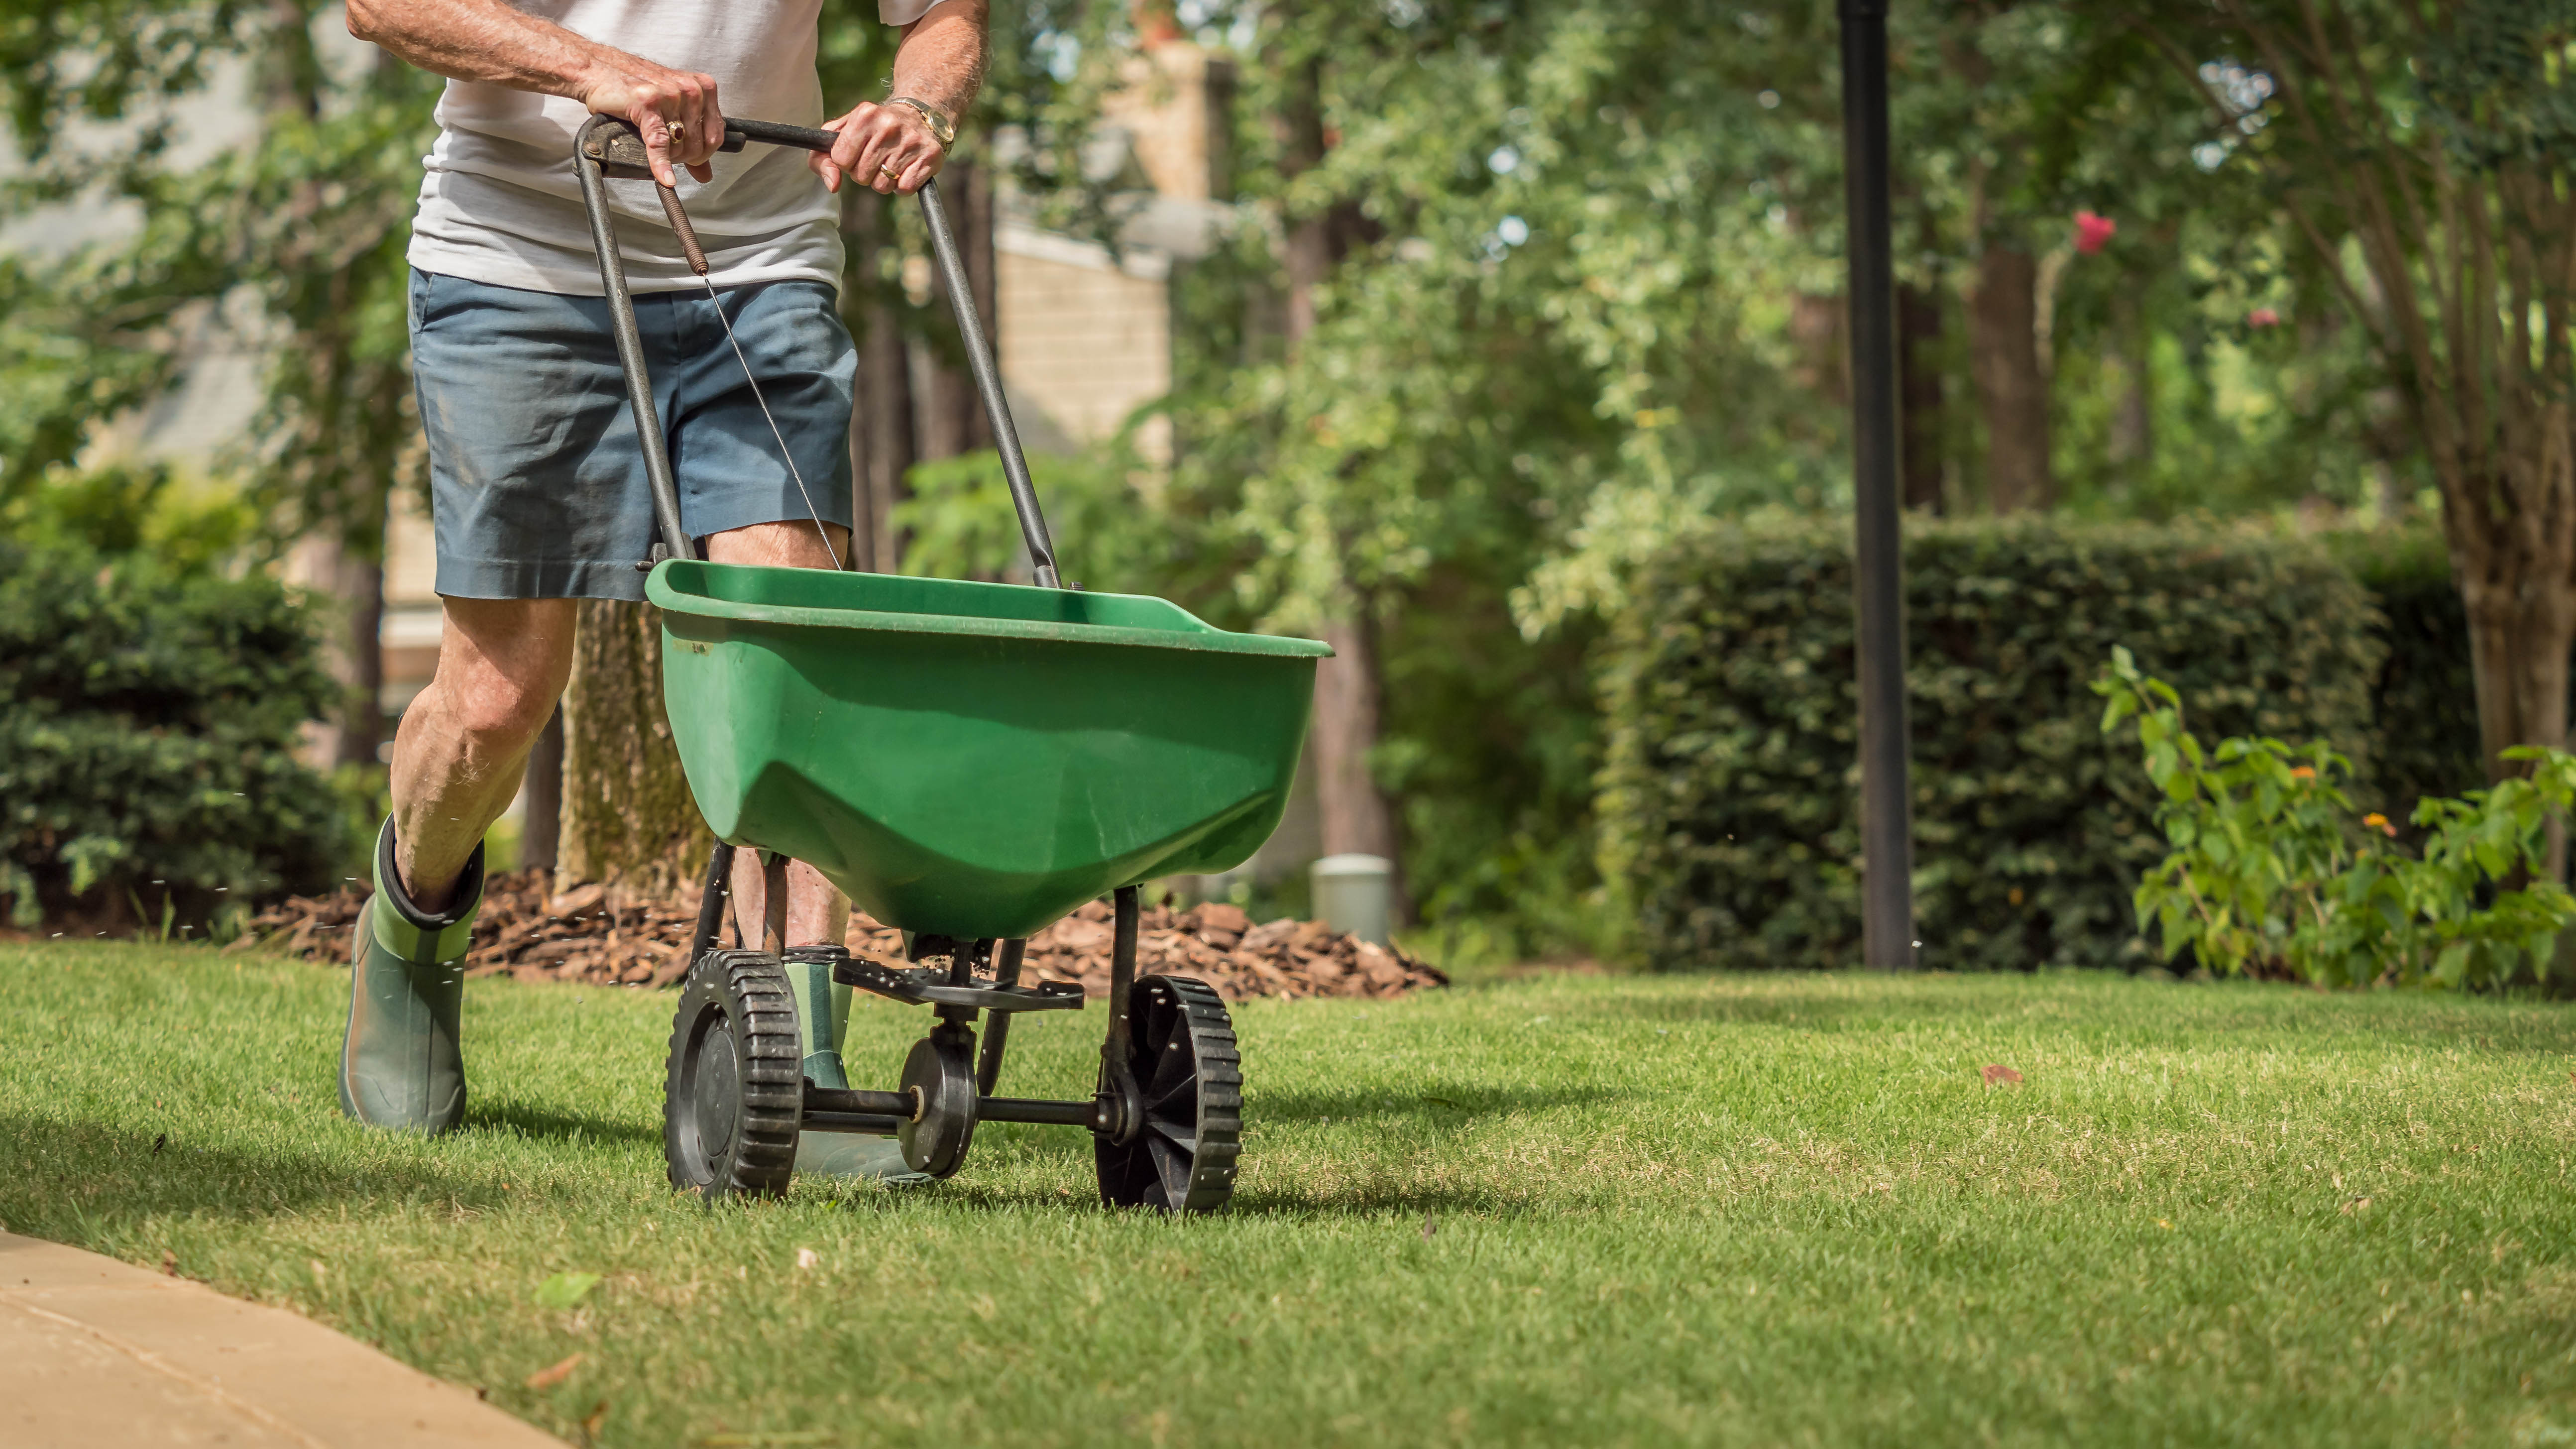 A spreader being used on a lawn by a man